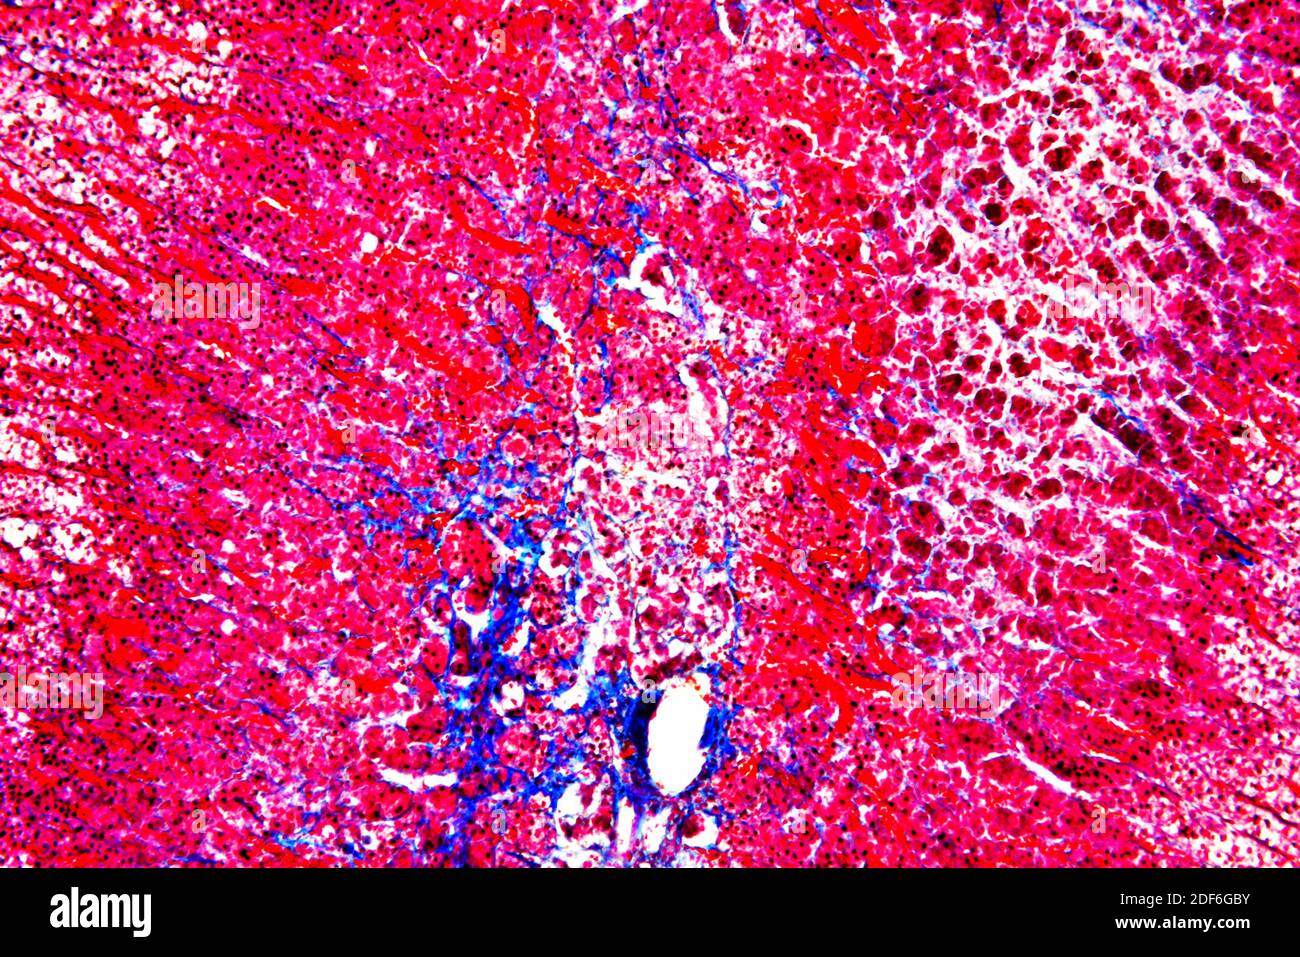 Human adrenal or suprarenal gland showing medulla. Produces adrenaline, aldosterone, and cortisol. Optical microscope X100. Stock Photo